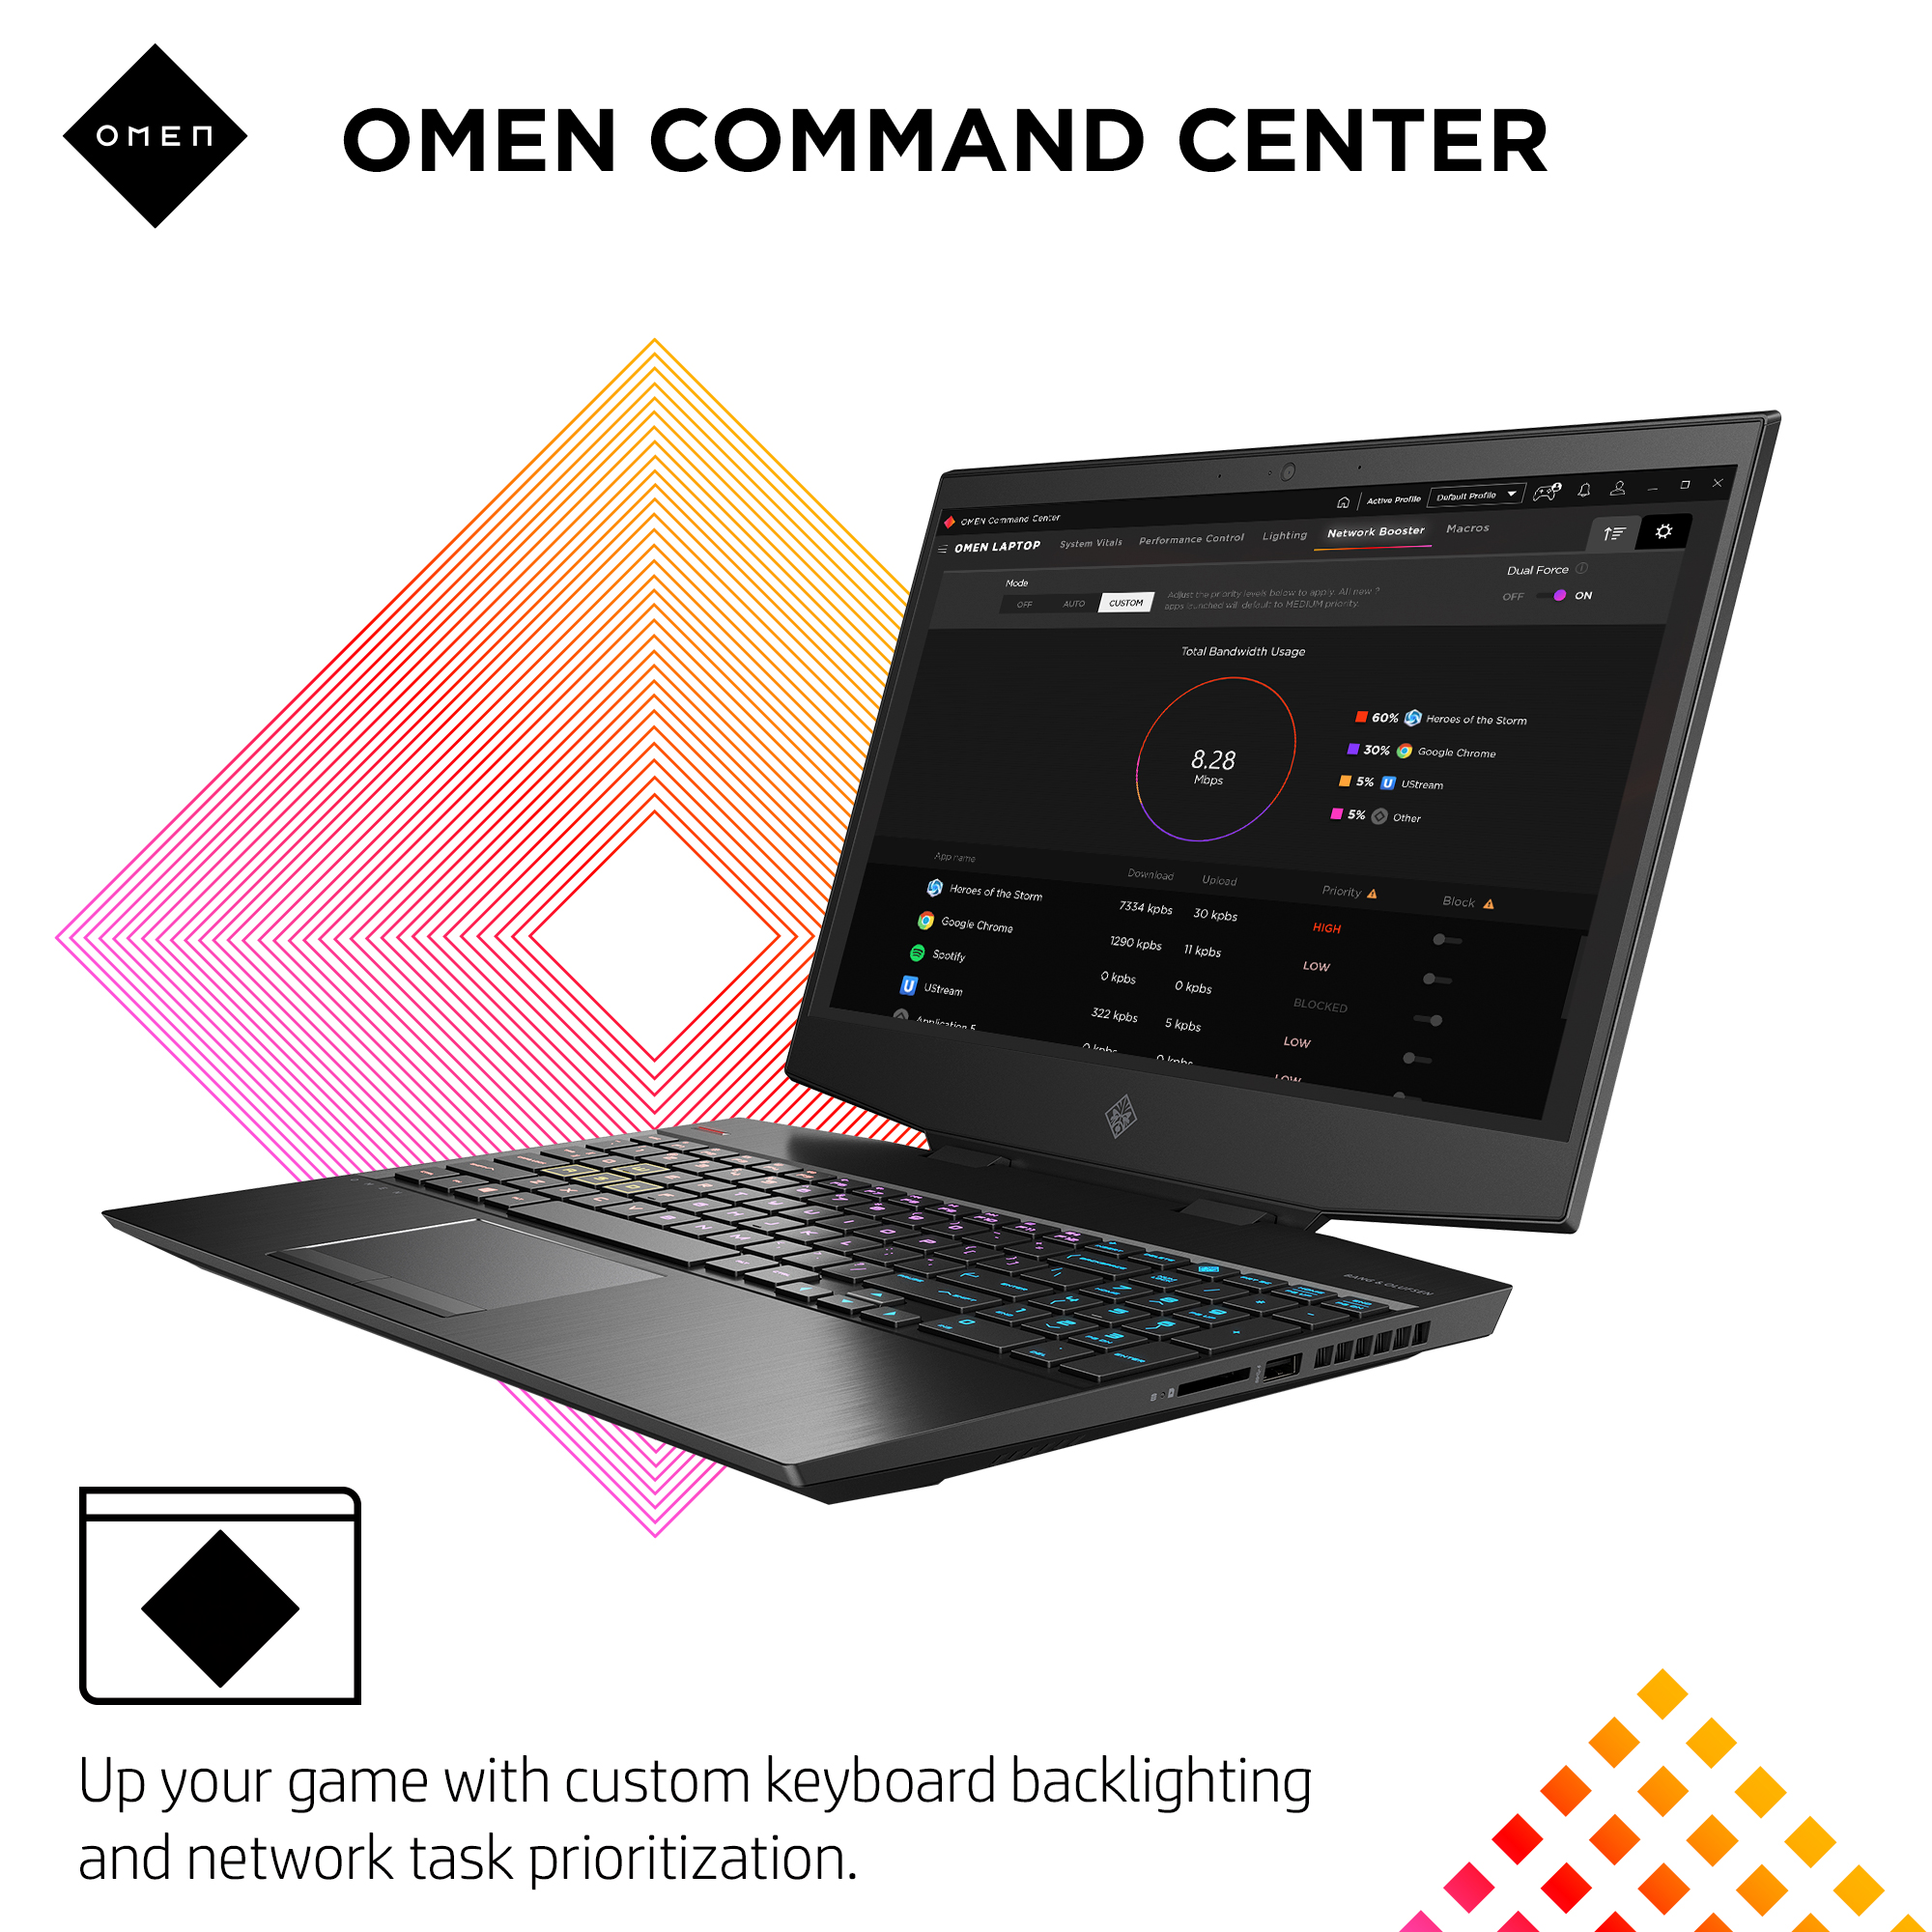 Omen by HP 15 FHD Gaming Laptop, Intel Core i7-10750H, NVIDIA GeForce GTX 1660 Ti 6GB, 8GB RAM, 1TB HDD + 256GB SSD, Mouse and Headset Bundle - image 3 of 16